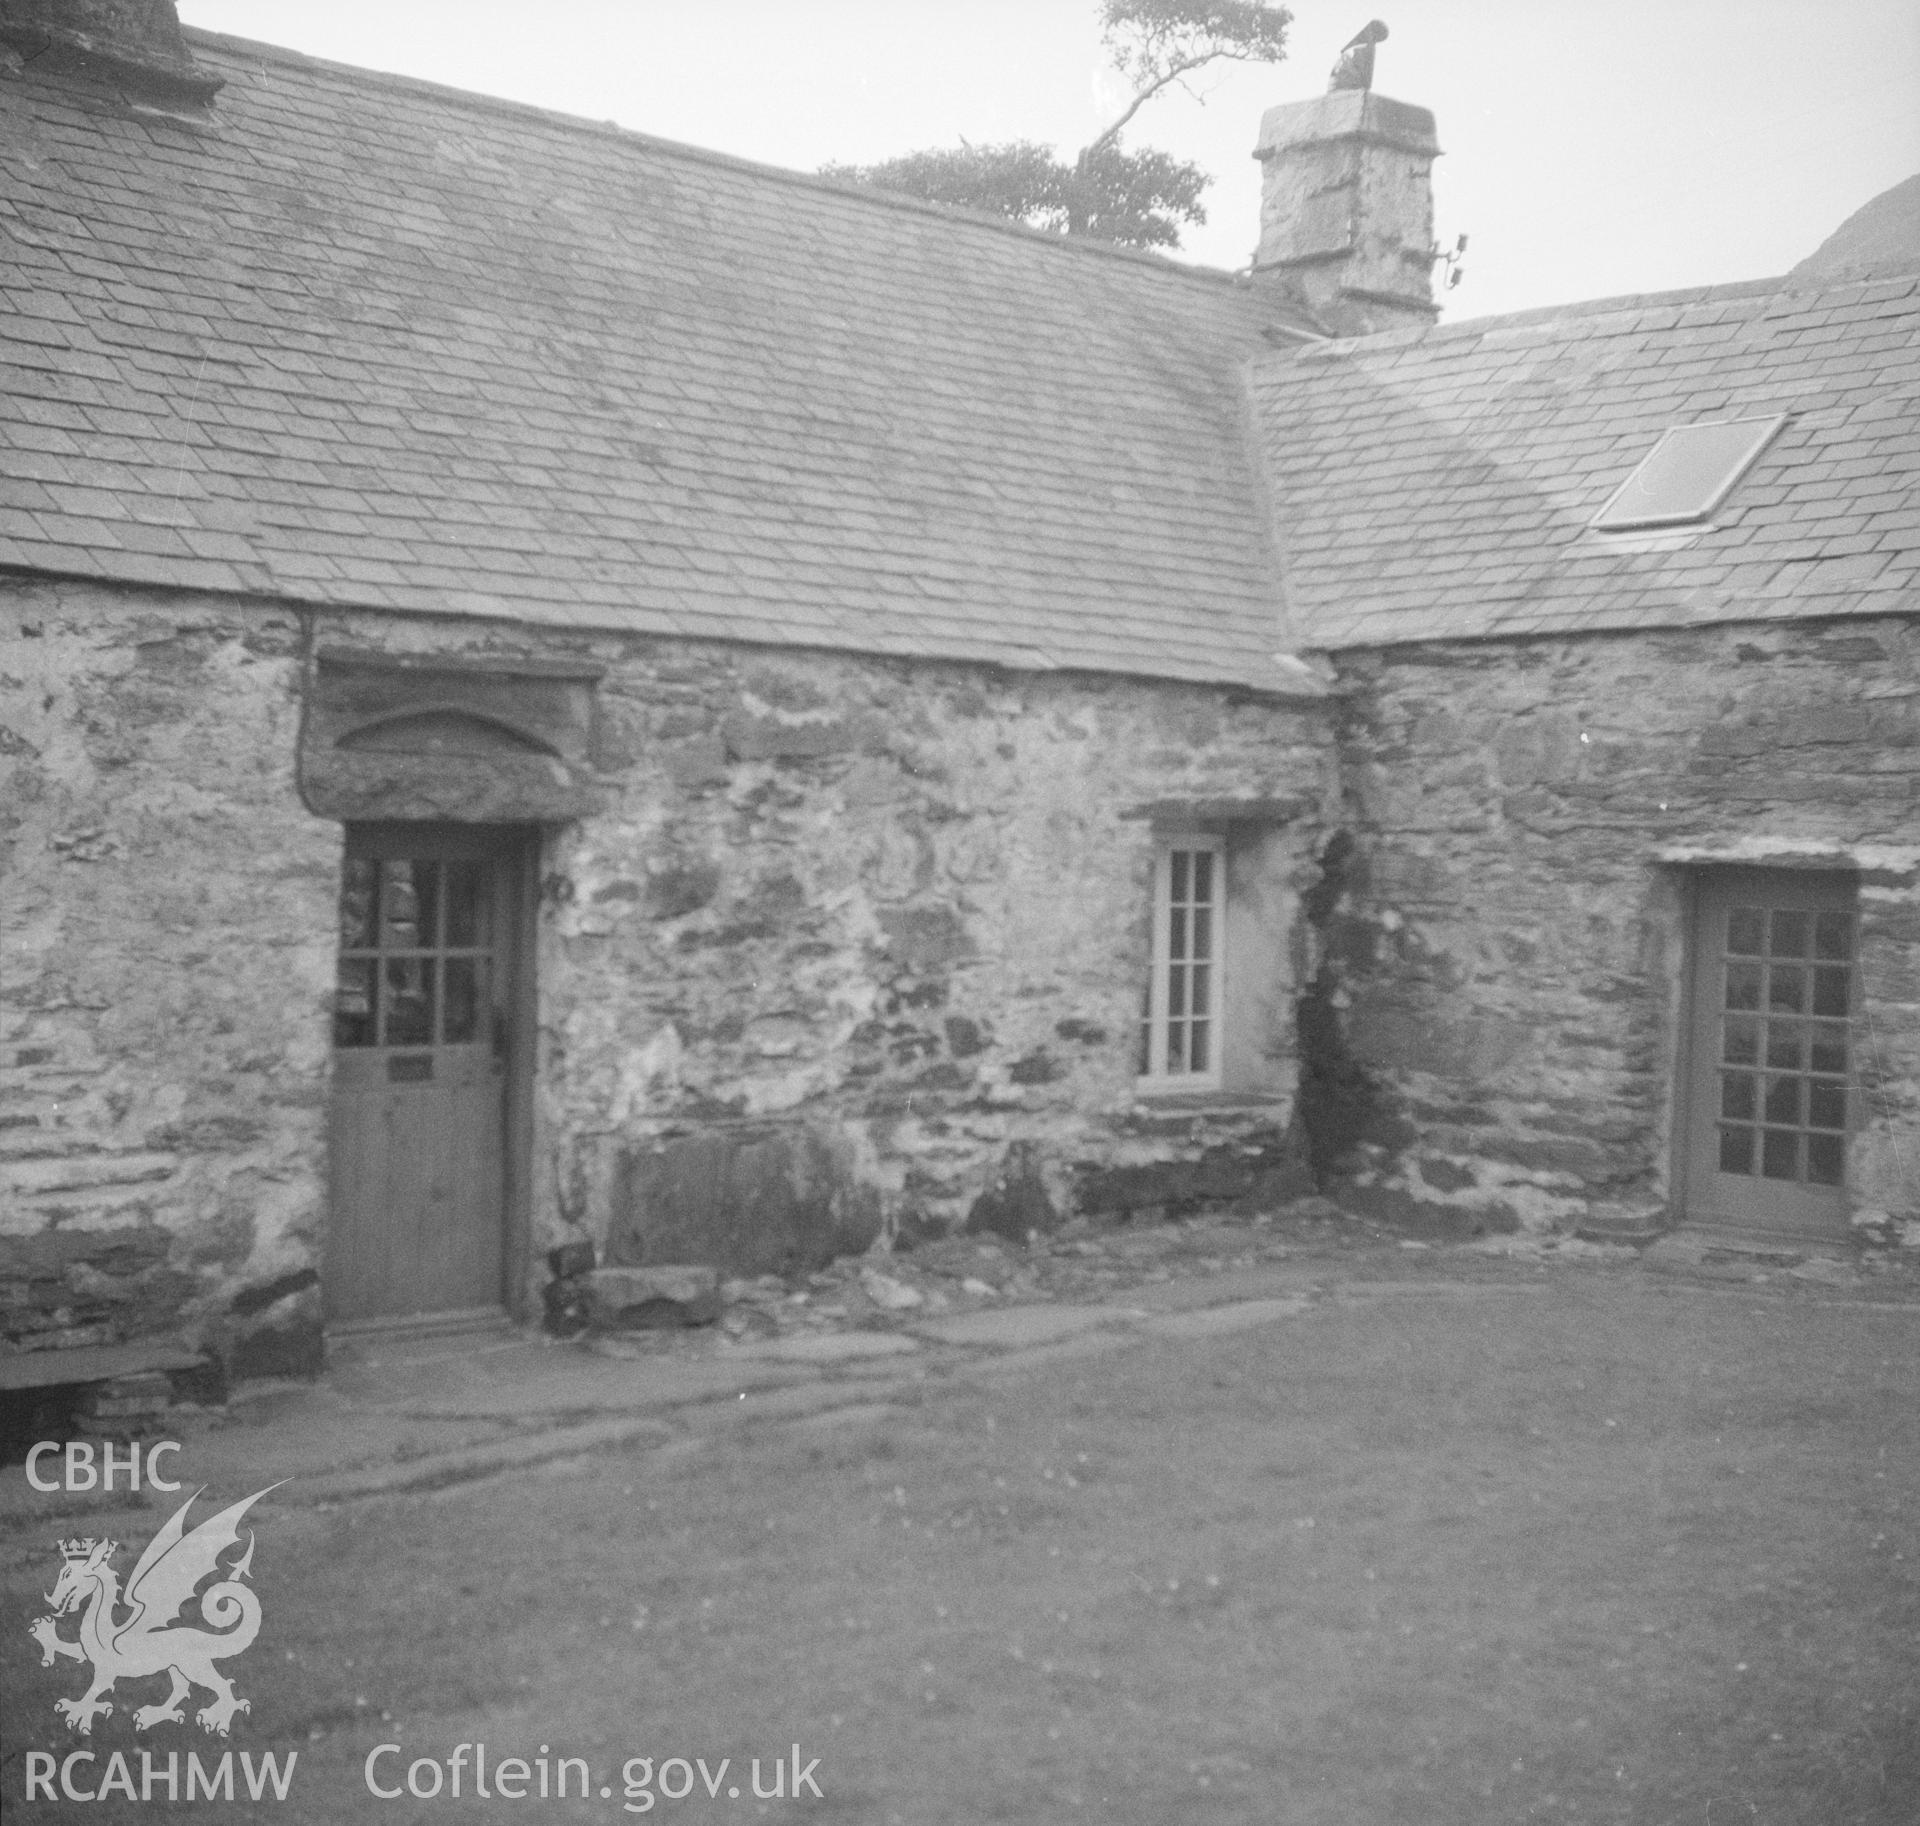 Digital copy of a black and white nitrate negative showing exterior view of Hafod Yspyty, Llan Ffestiniog, Merioneth.